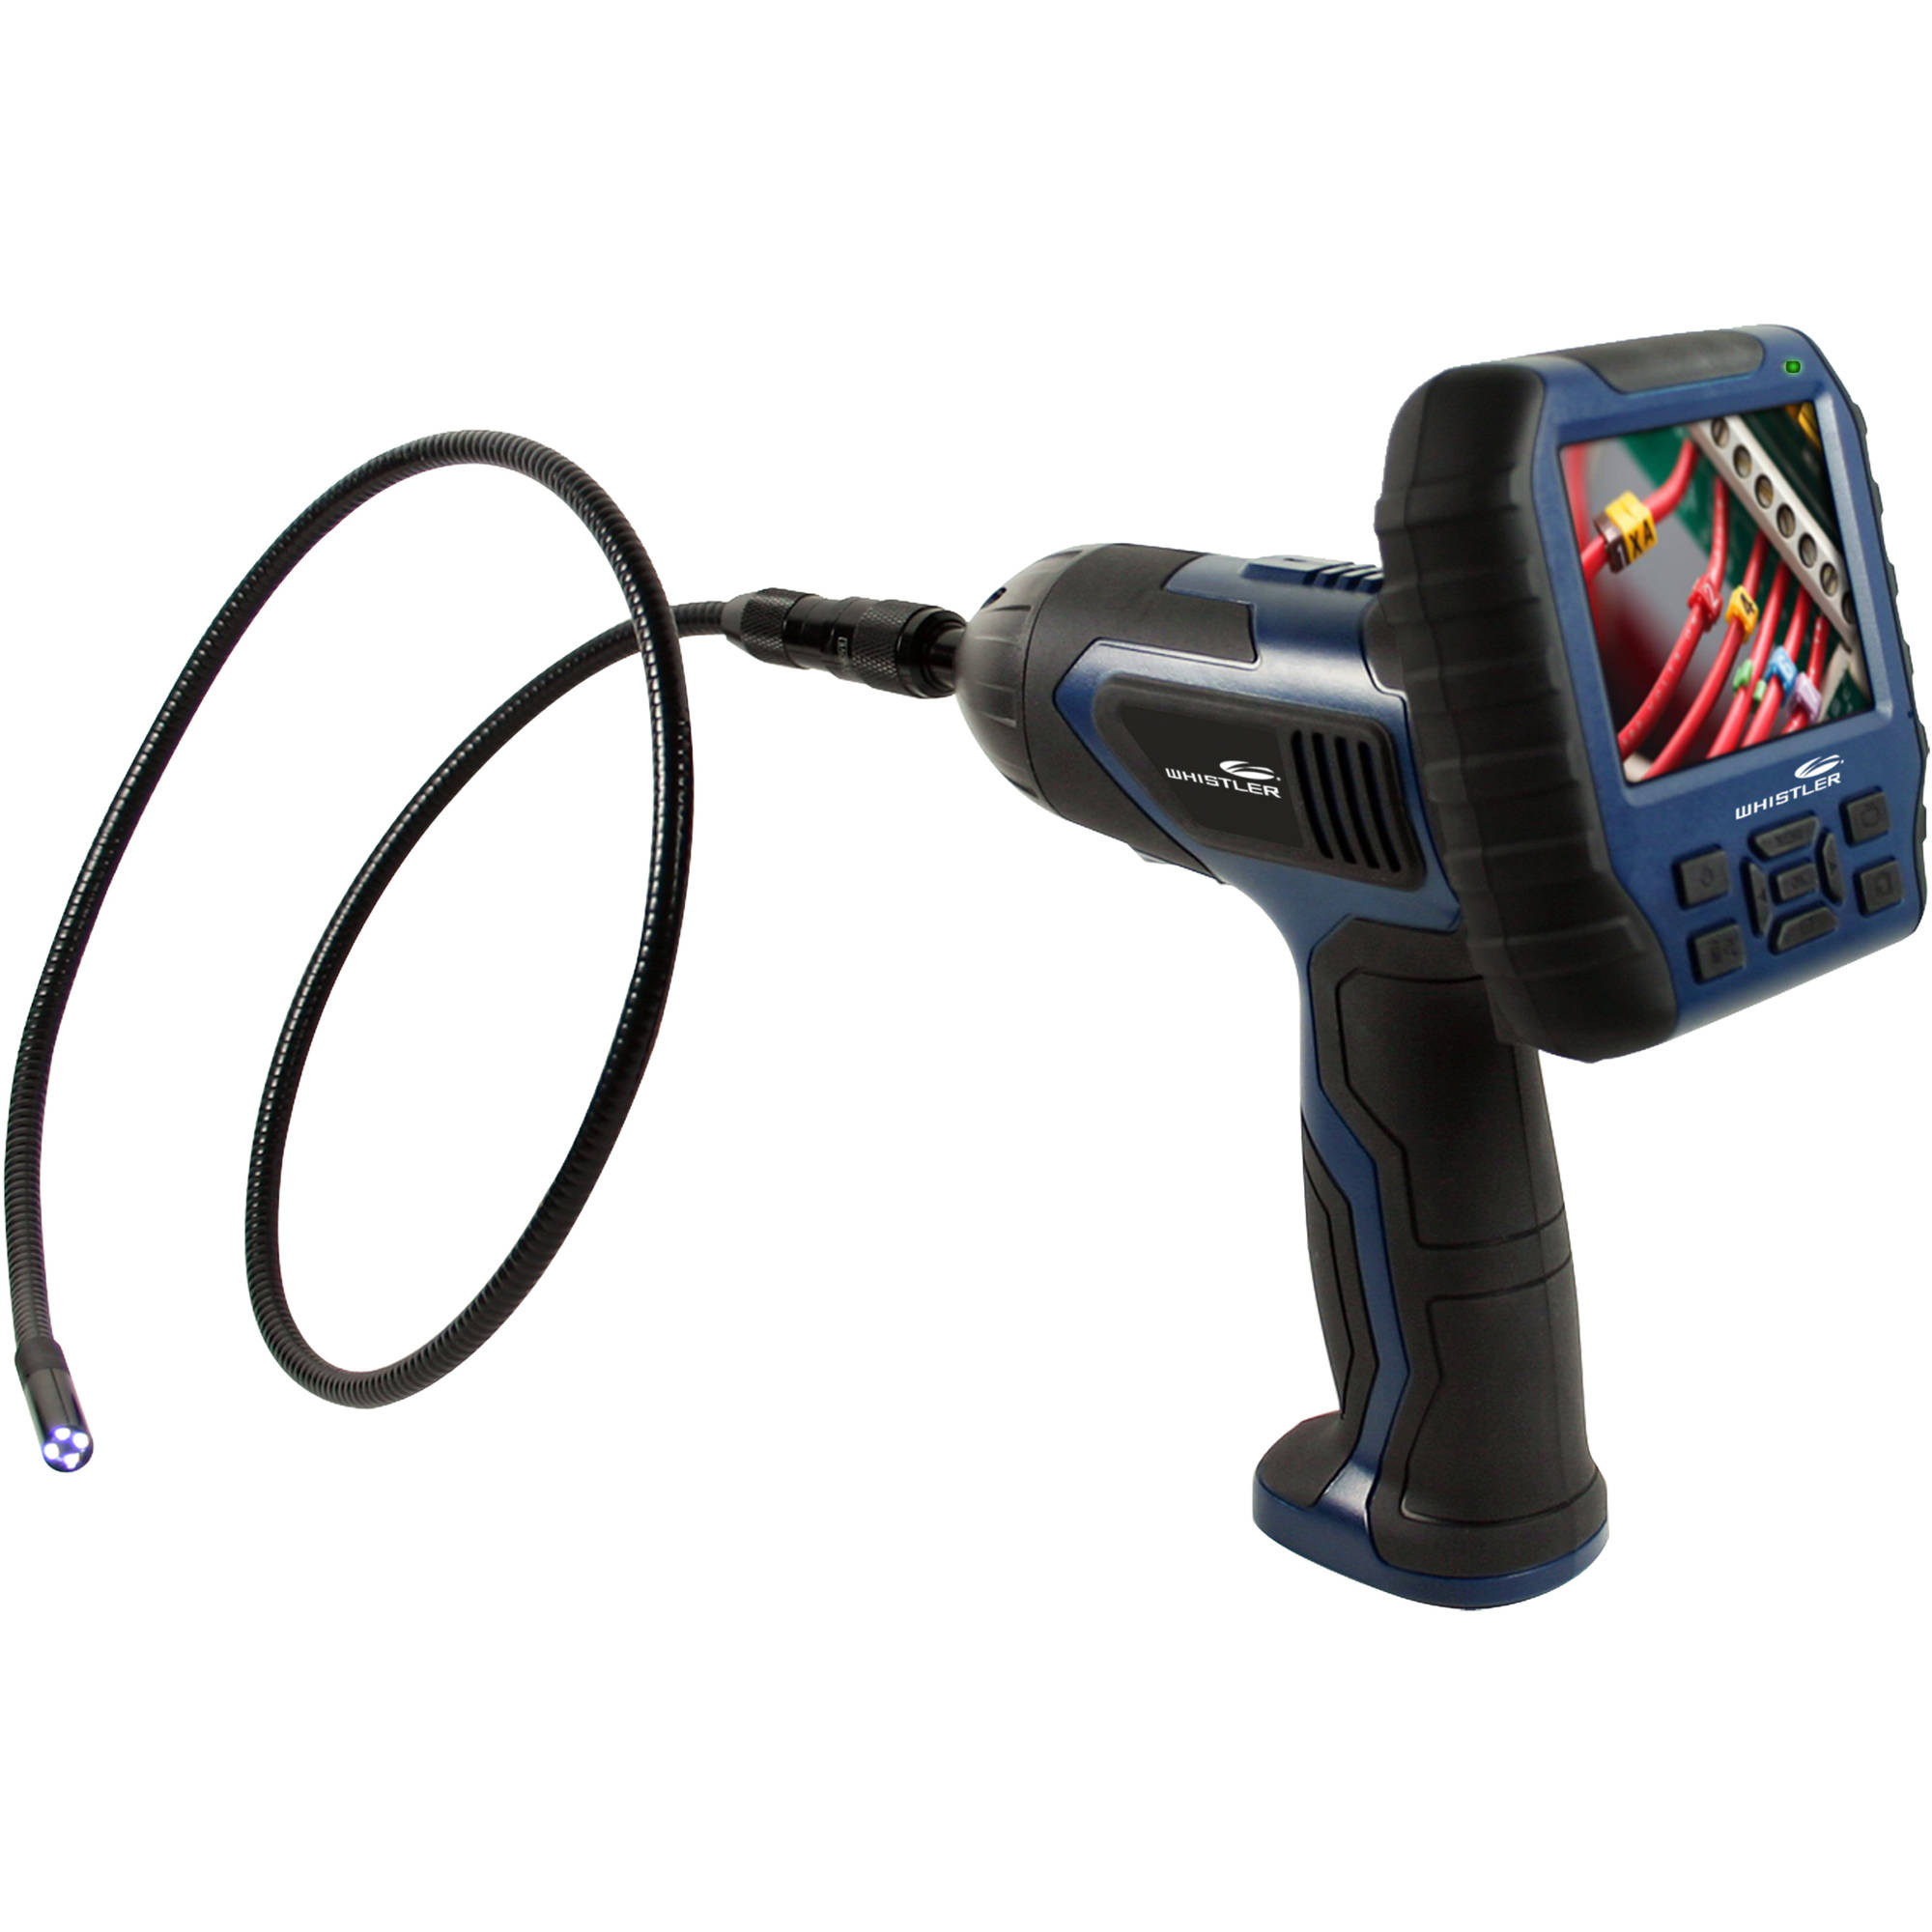 Whistler 9mm Wireless Inspection Camera Records Video & Audio - image 1 of 4